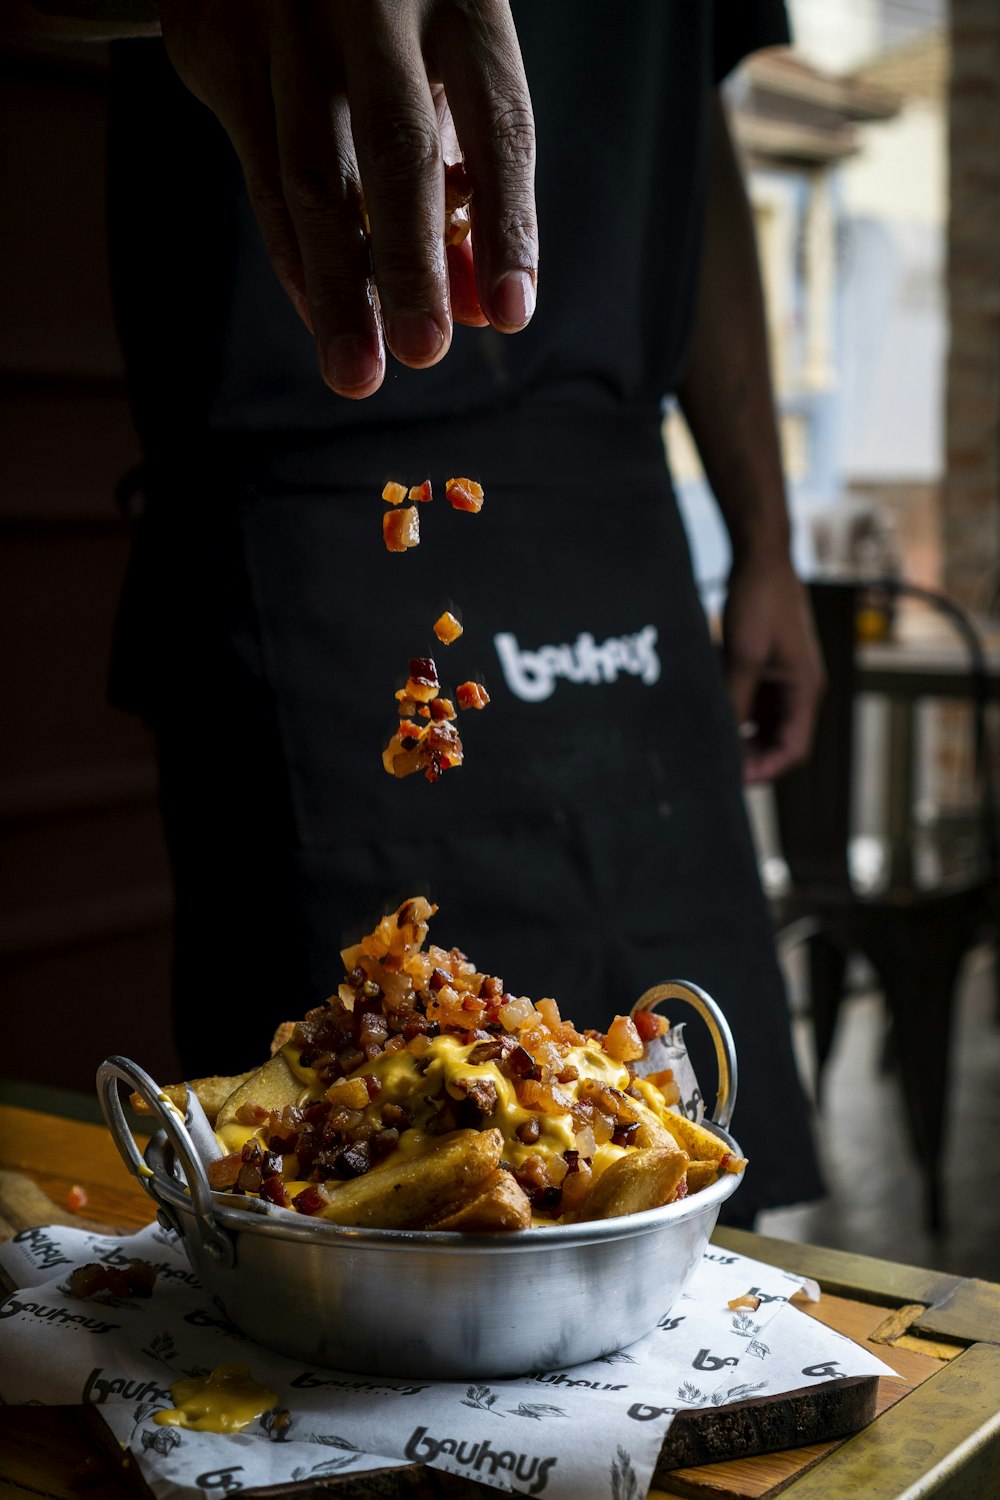 a person is sprinkling chili onto a bowl of french fries